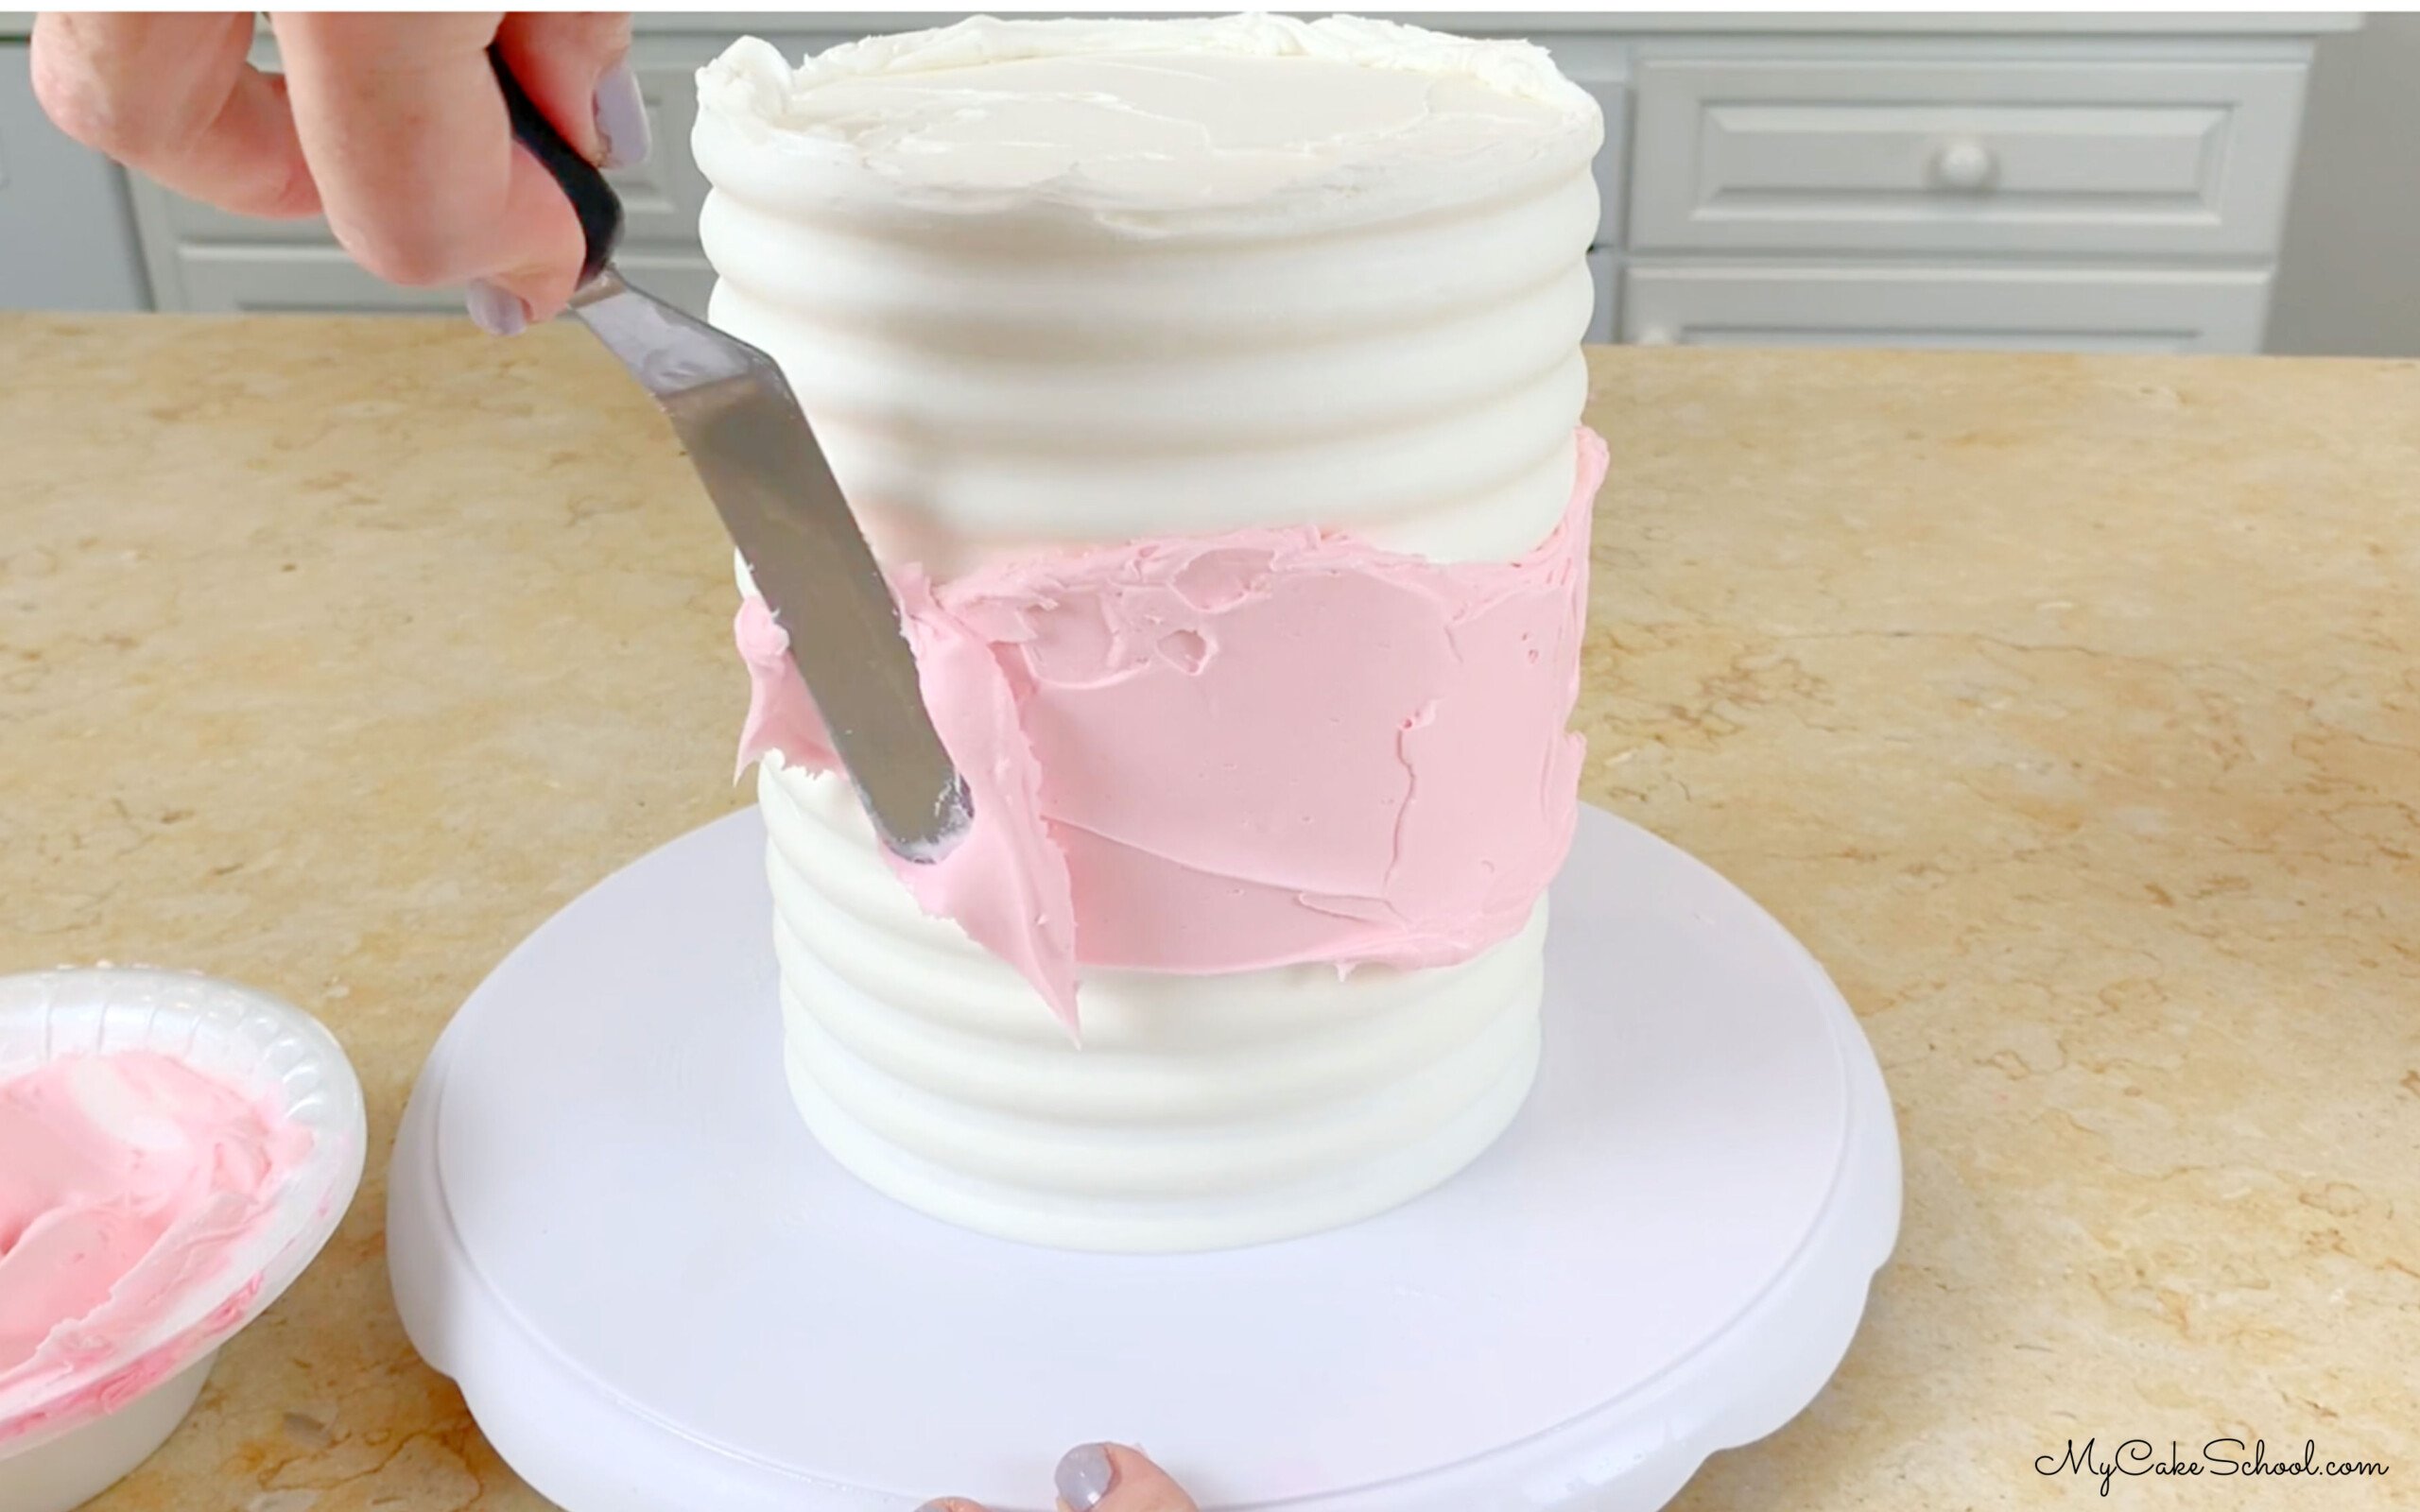 Adding light pink buttercream to the mid section of the cake around the sides.